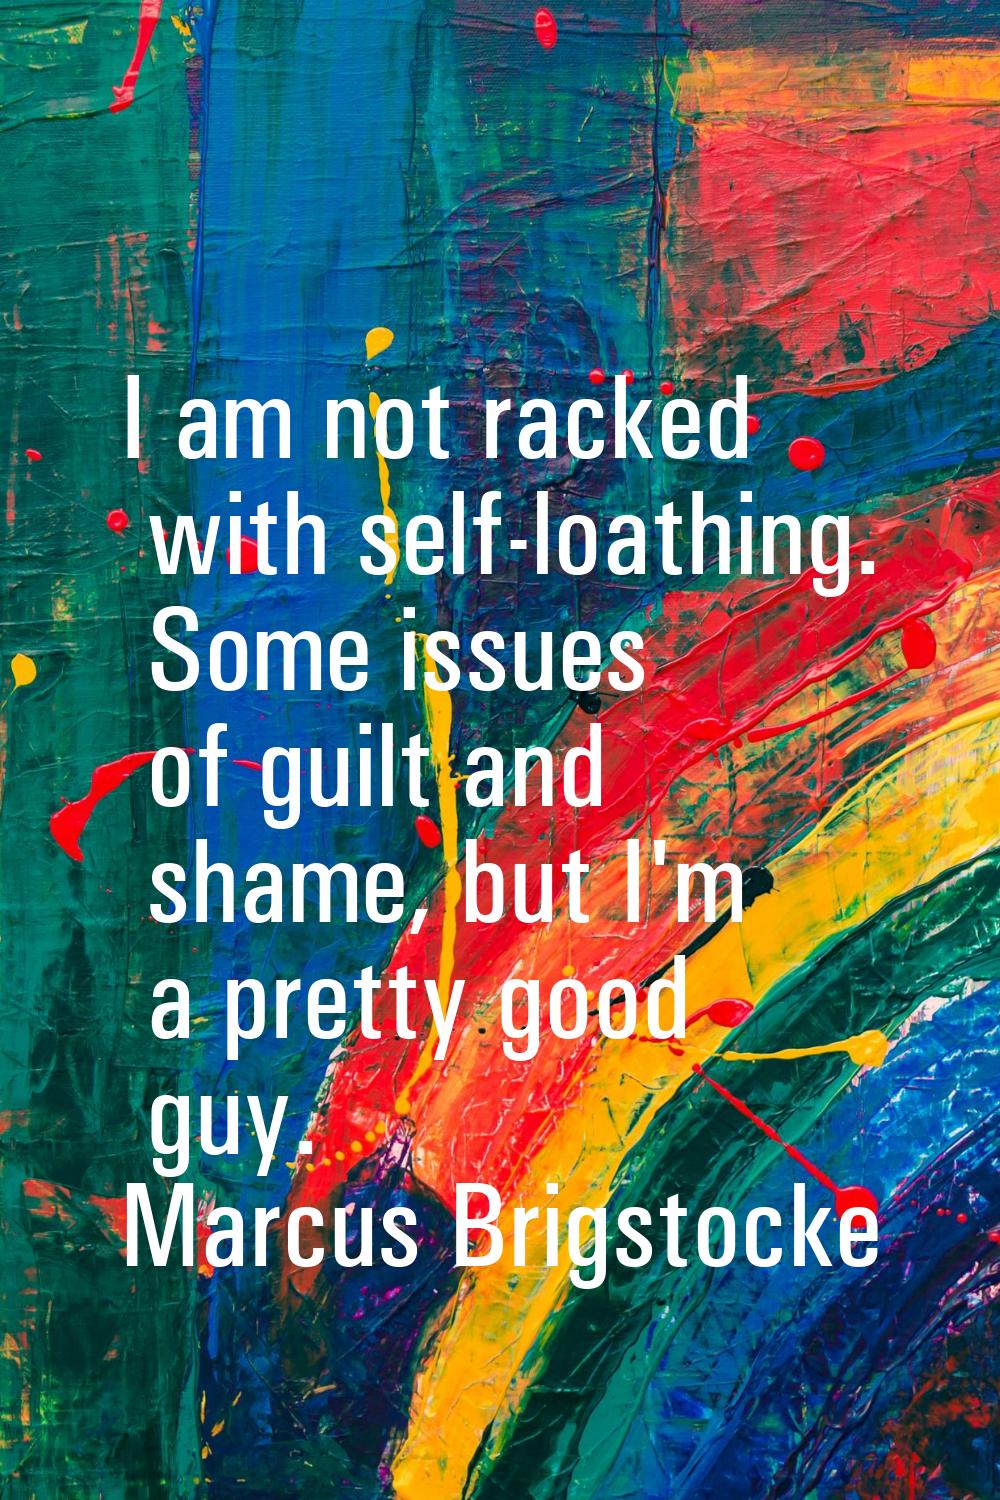 I am not racked with self-loathing. Some issues of guilt and shame, but I'm a pretty good guy.